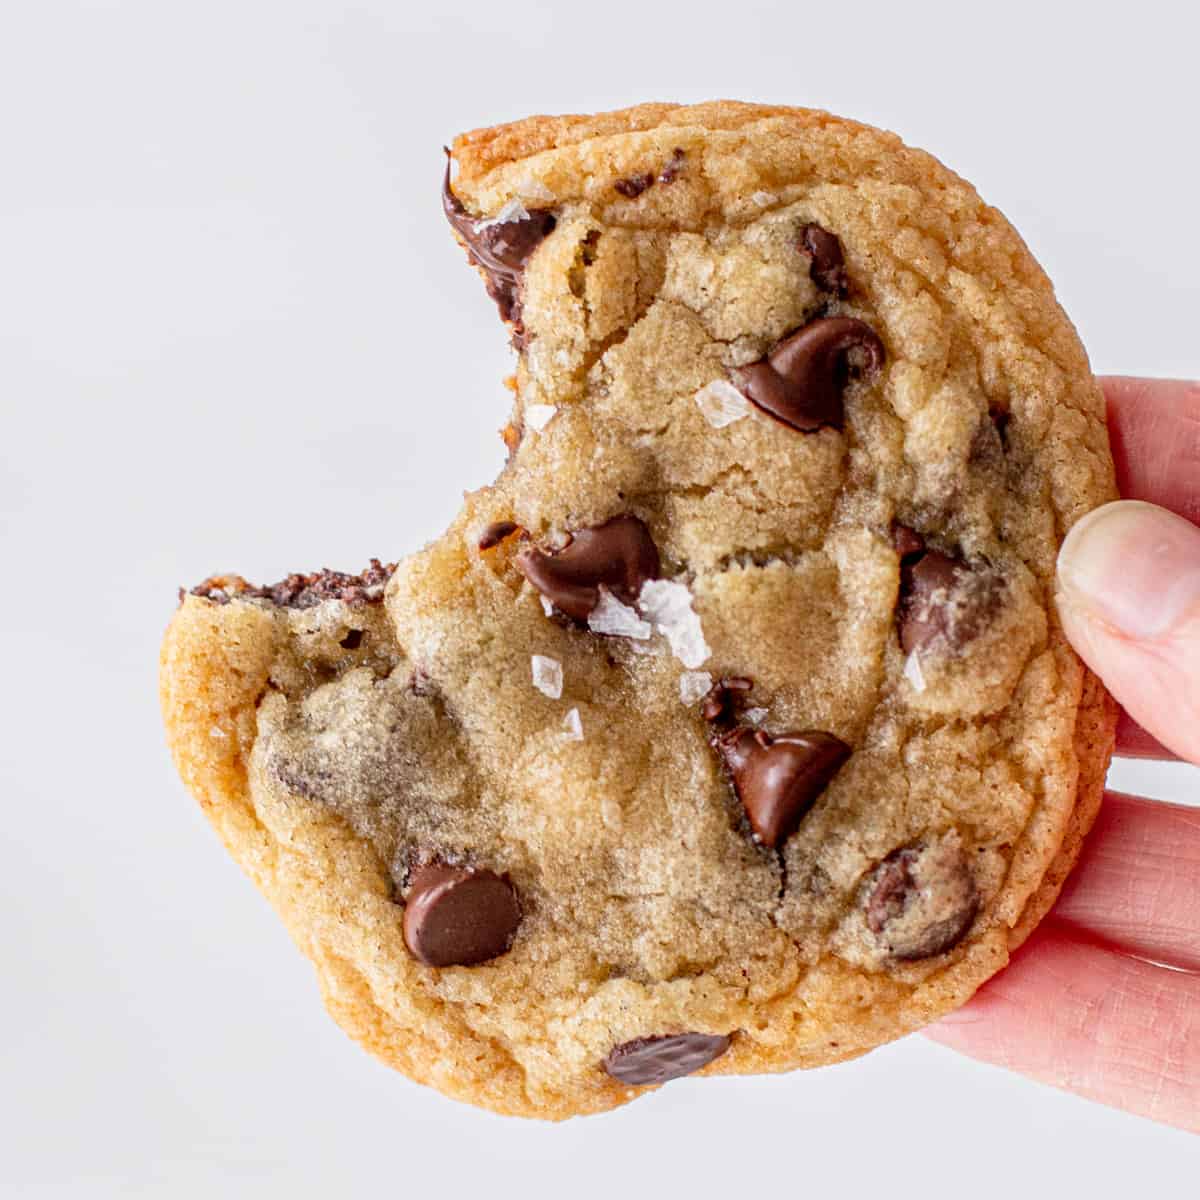 https://inquiringchef.com/wp-content/uploads/2022/03/Crispy-and-Chewy-Chocolate-Chip-Cookies-7925-1.jpg